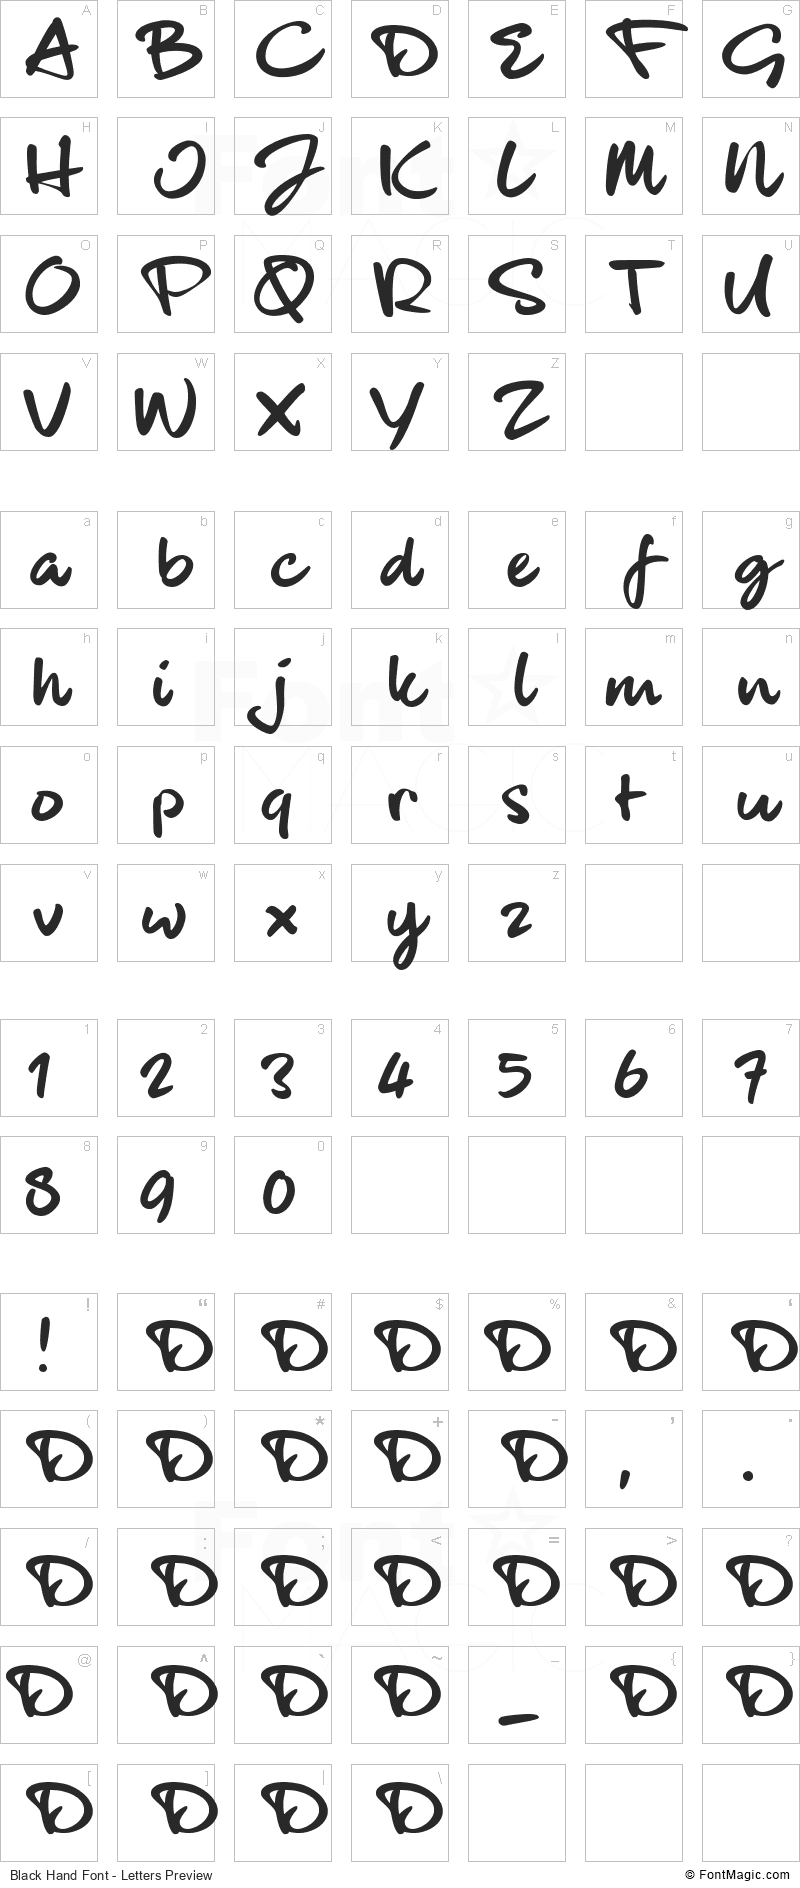 Black Hand Font - All Latters Preview Chart